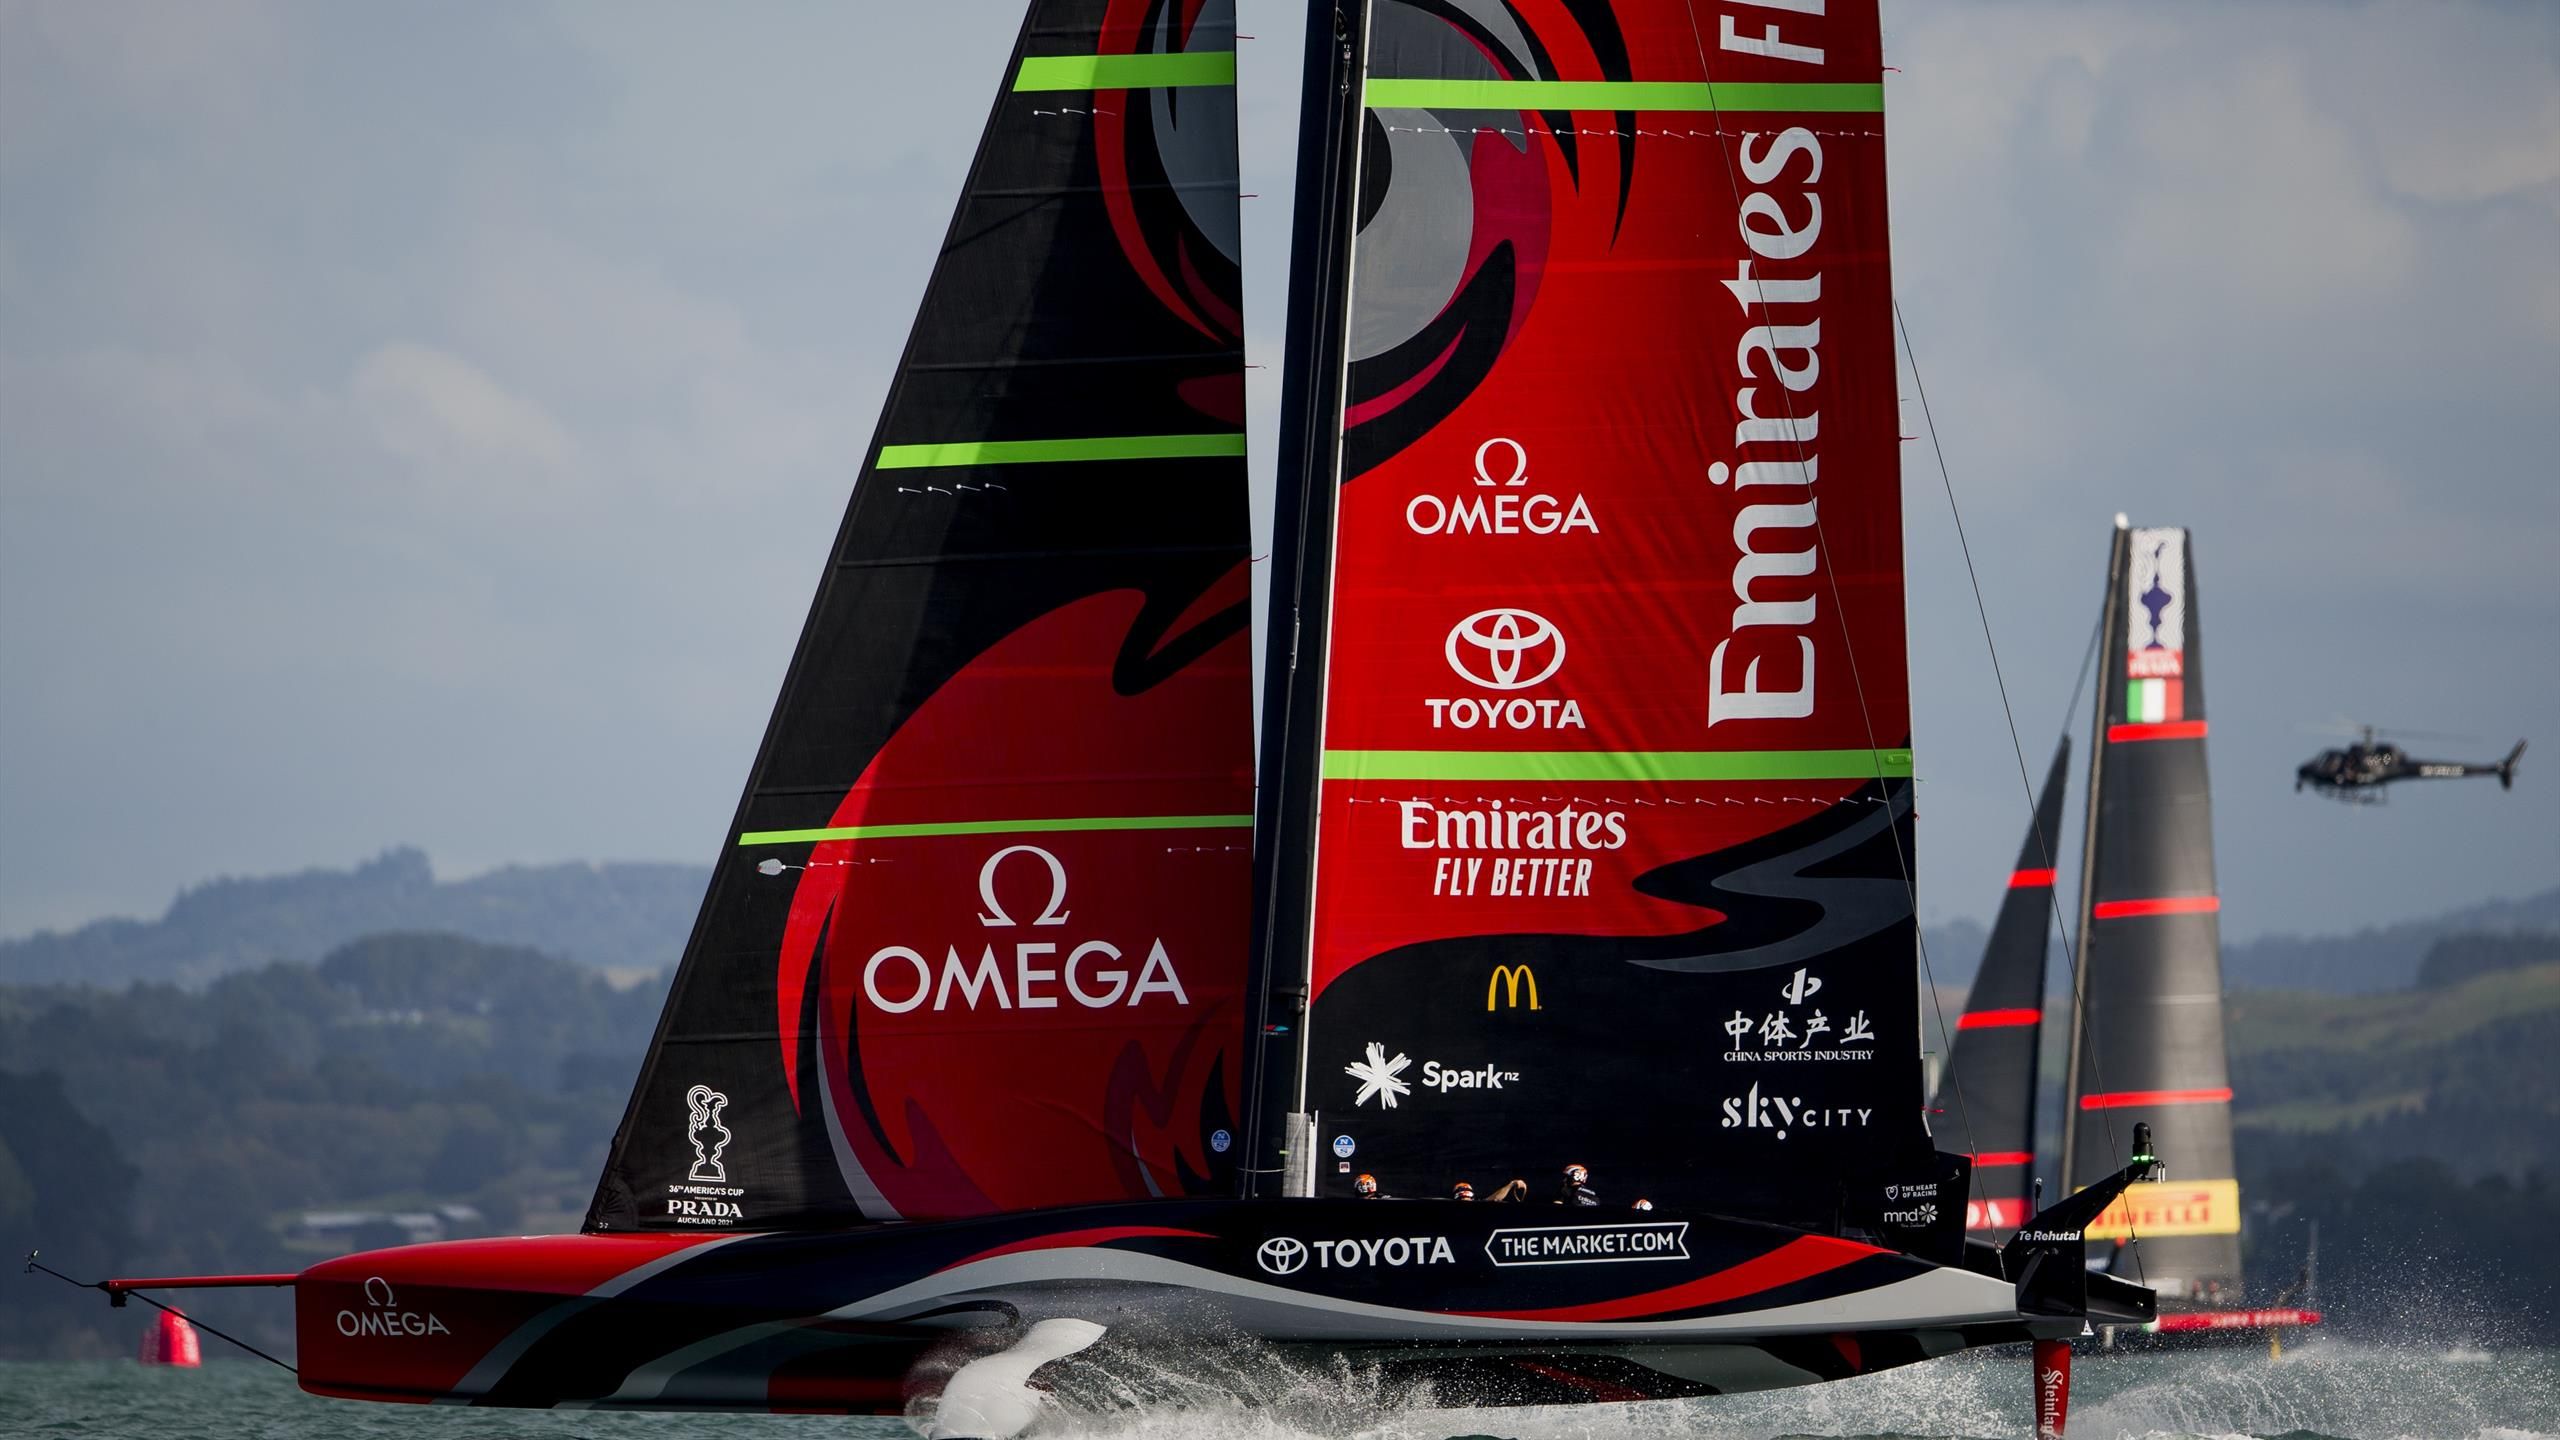 New Trophy for America's Cup Challenger >> Scuttlebutt Sailing News